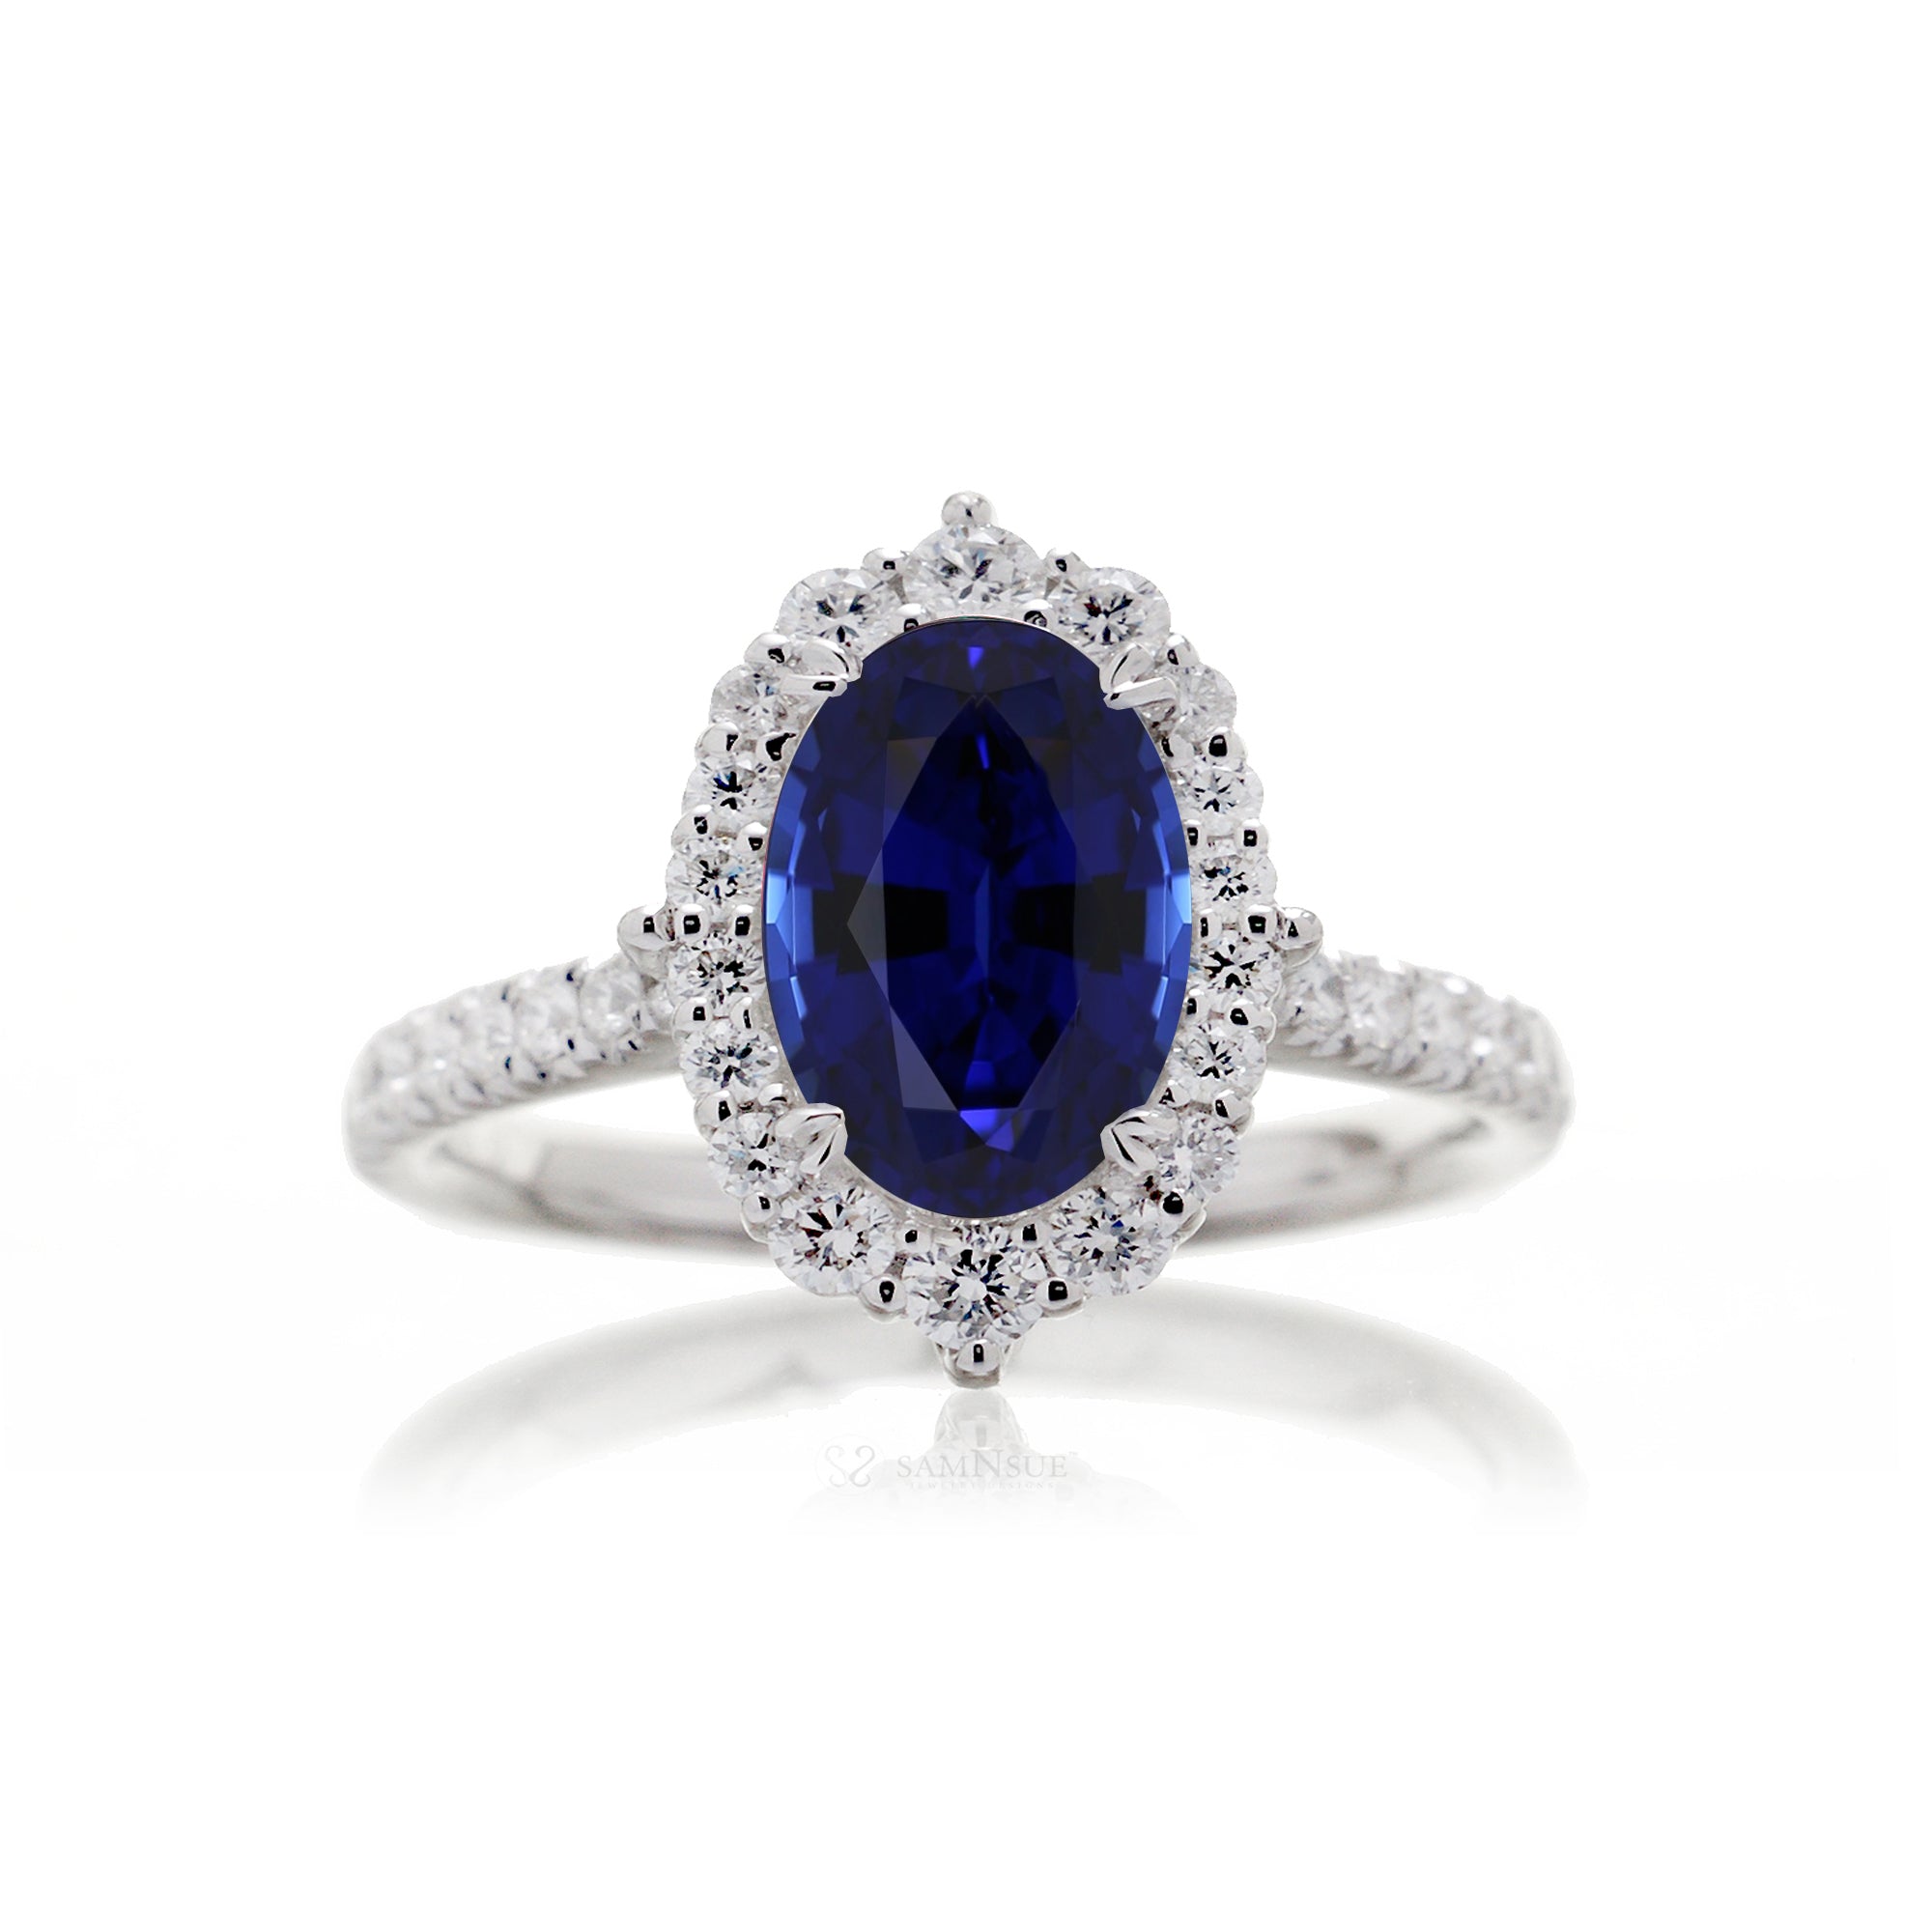 The Haley Oval Lab-Grown Sapphire Ring